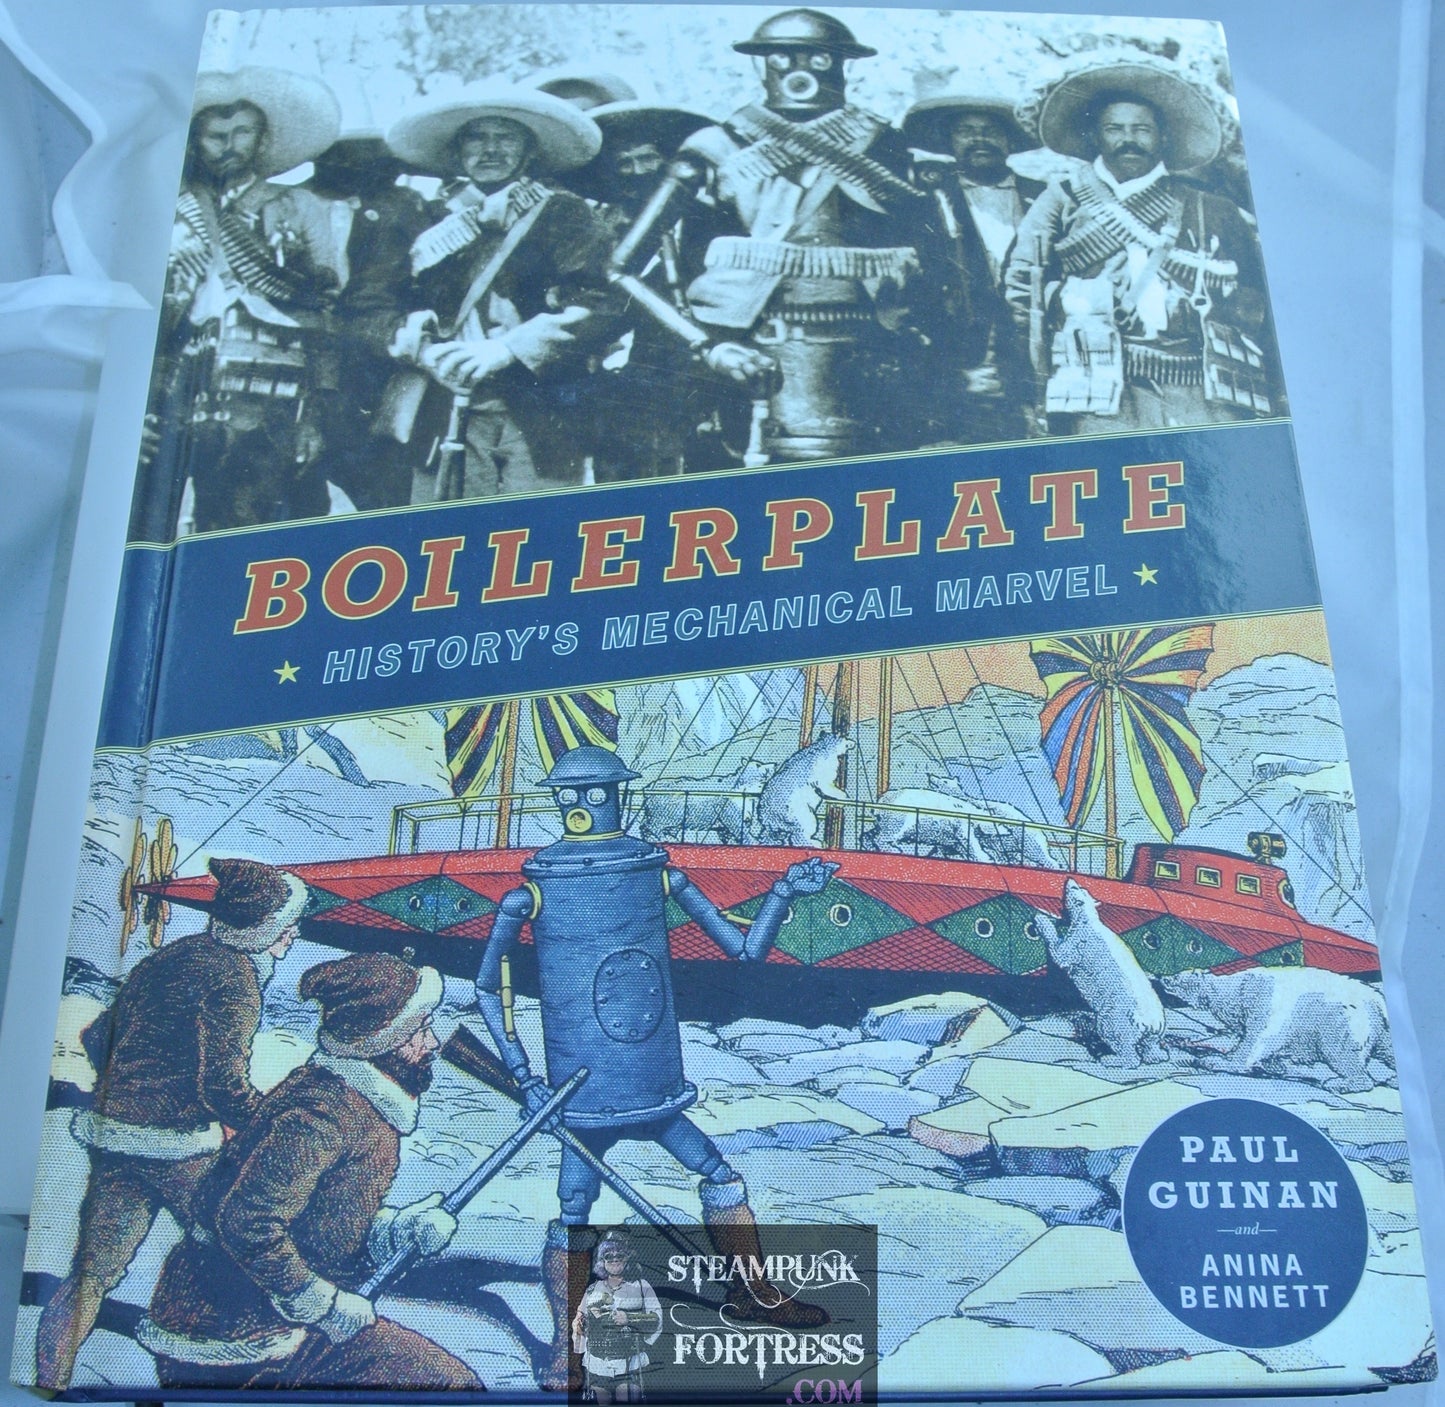 BOILERPLATE HISTORY'S MECHANICAL MARVEL PAUL GUINAN ANINA BENNETT SIGNED AUTOGRAPHED DRAWING AS WELL HARDCOVER SDCC